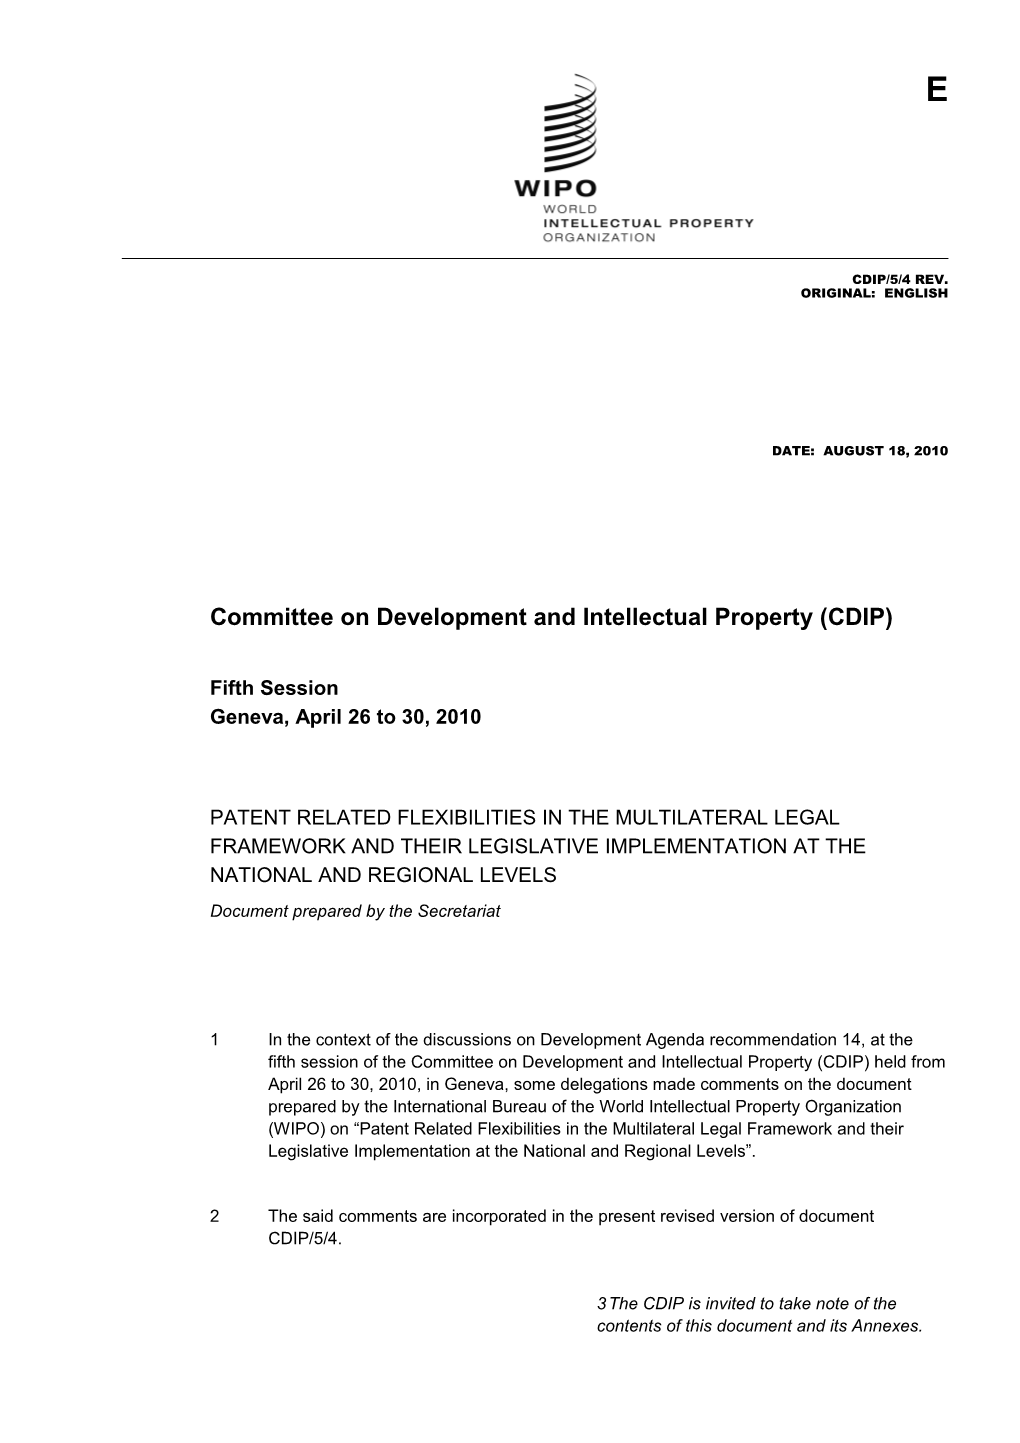 Committee on Development and Intellectual Property (CDIP) s2